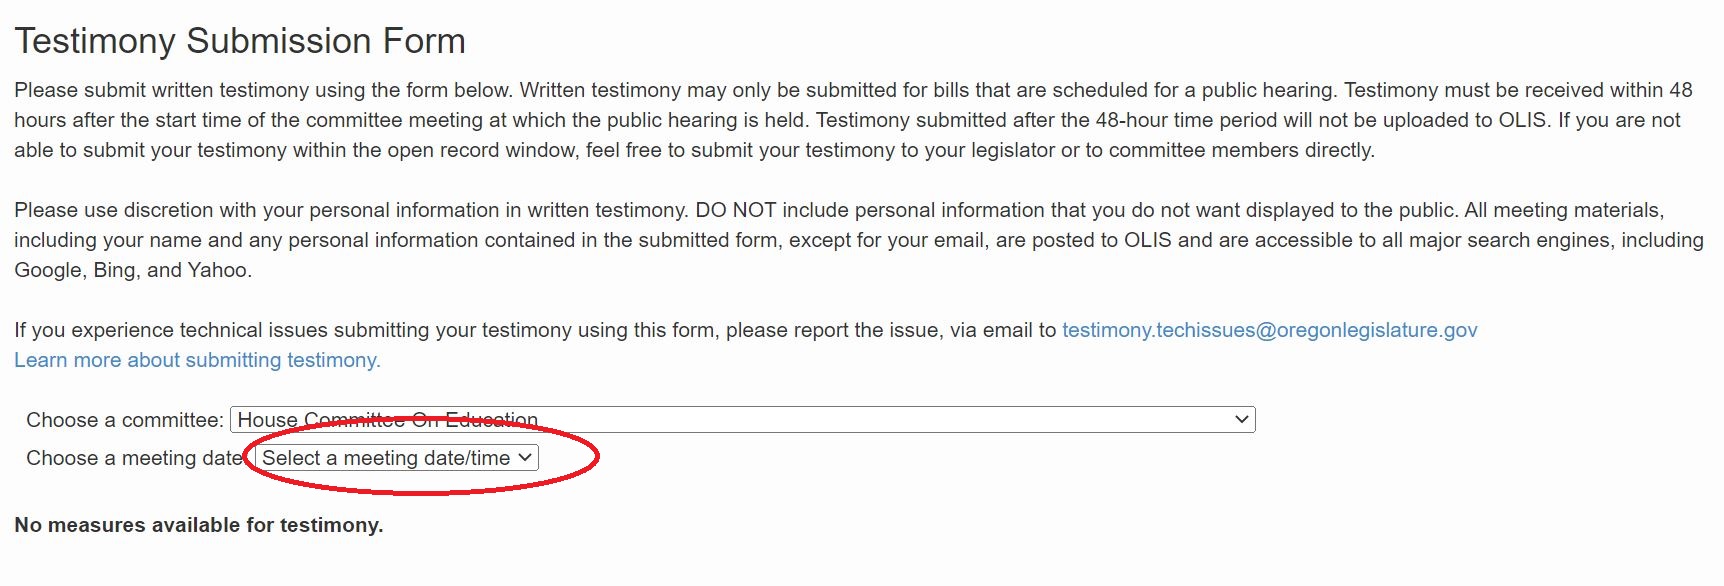 Testimony Submission Form-Select a meeting date